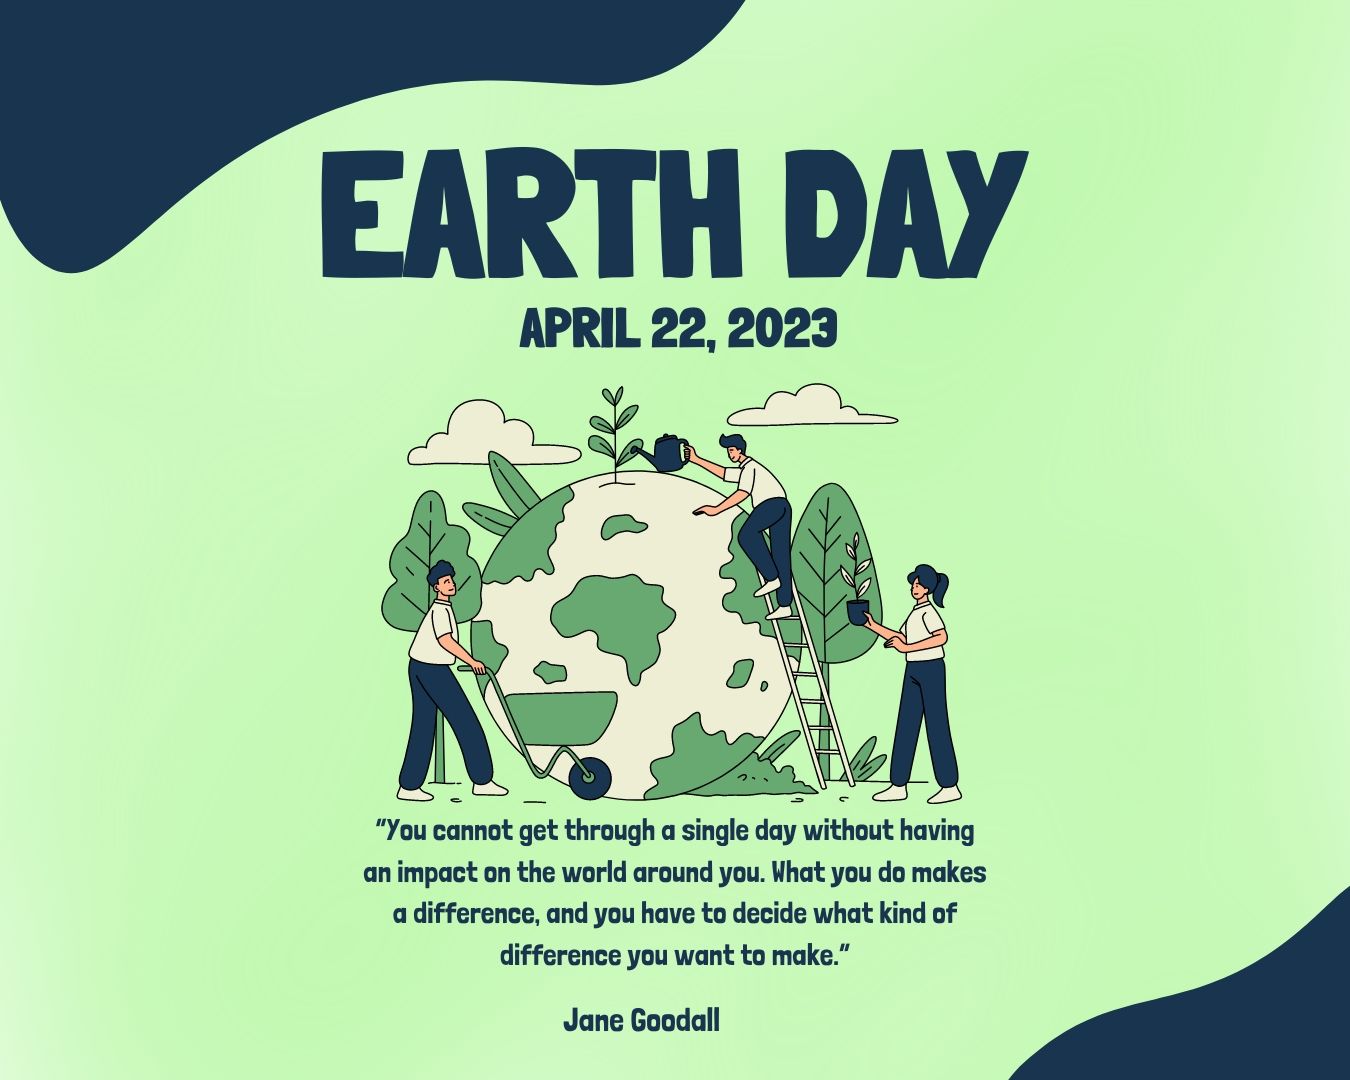 Get your hands dirty on Earth Day!